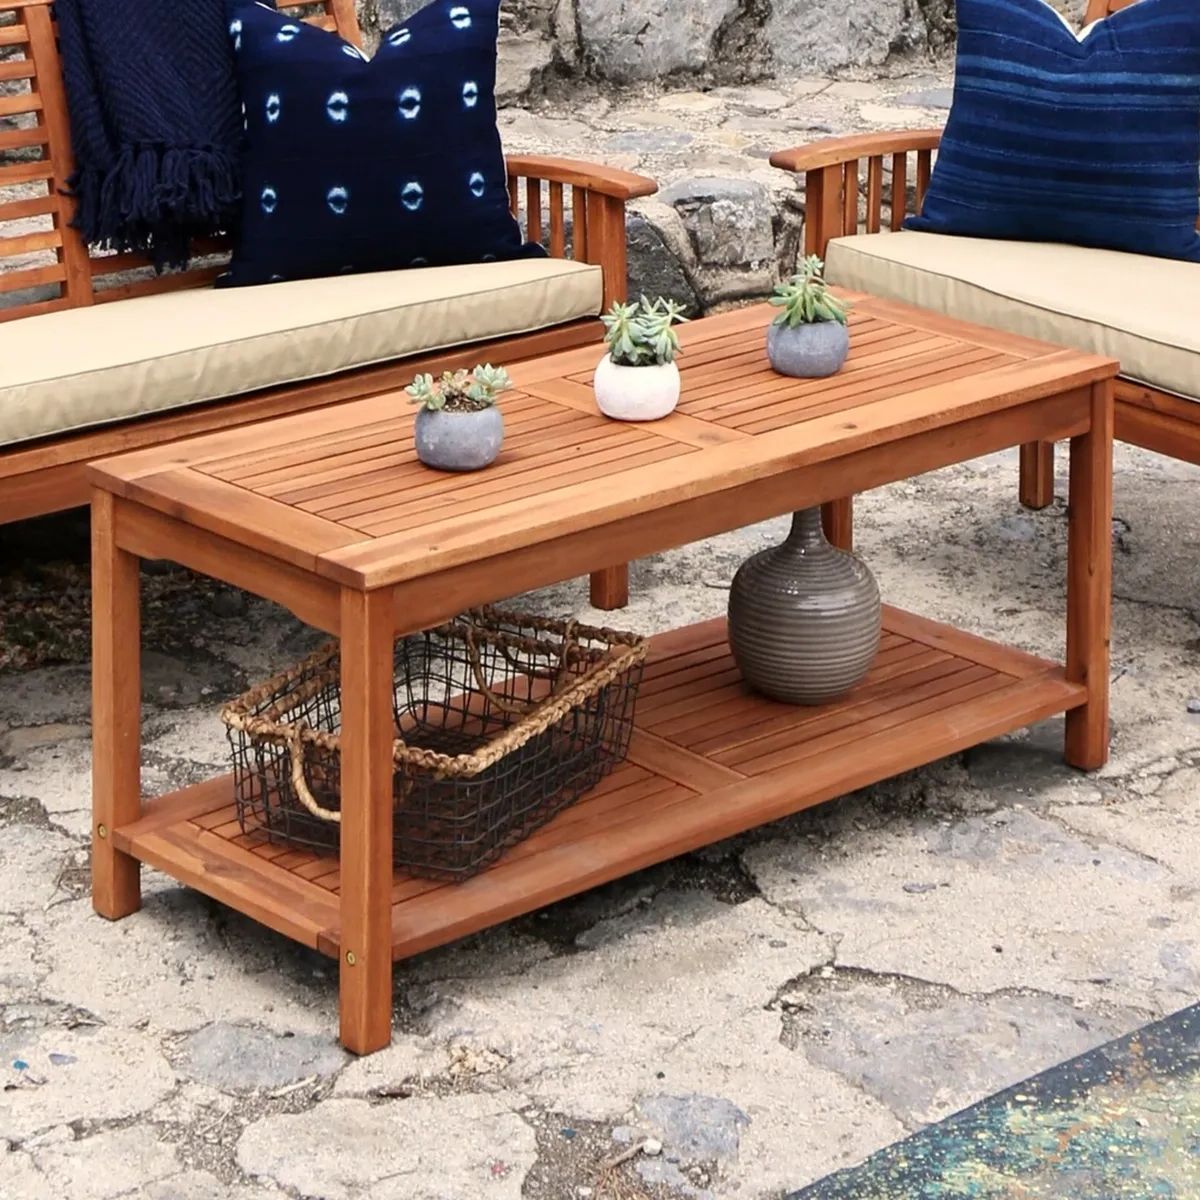 Ebay With Regard To Fashionable Outdoor Coffee Tables With Storage (View 8 of 10)